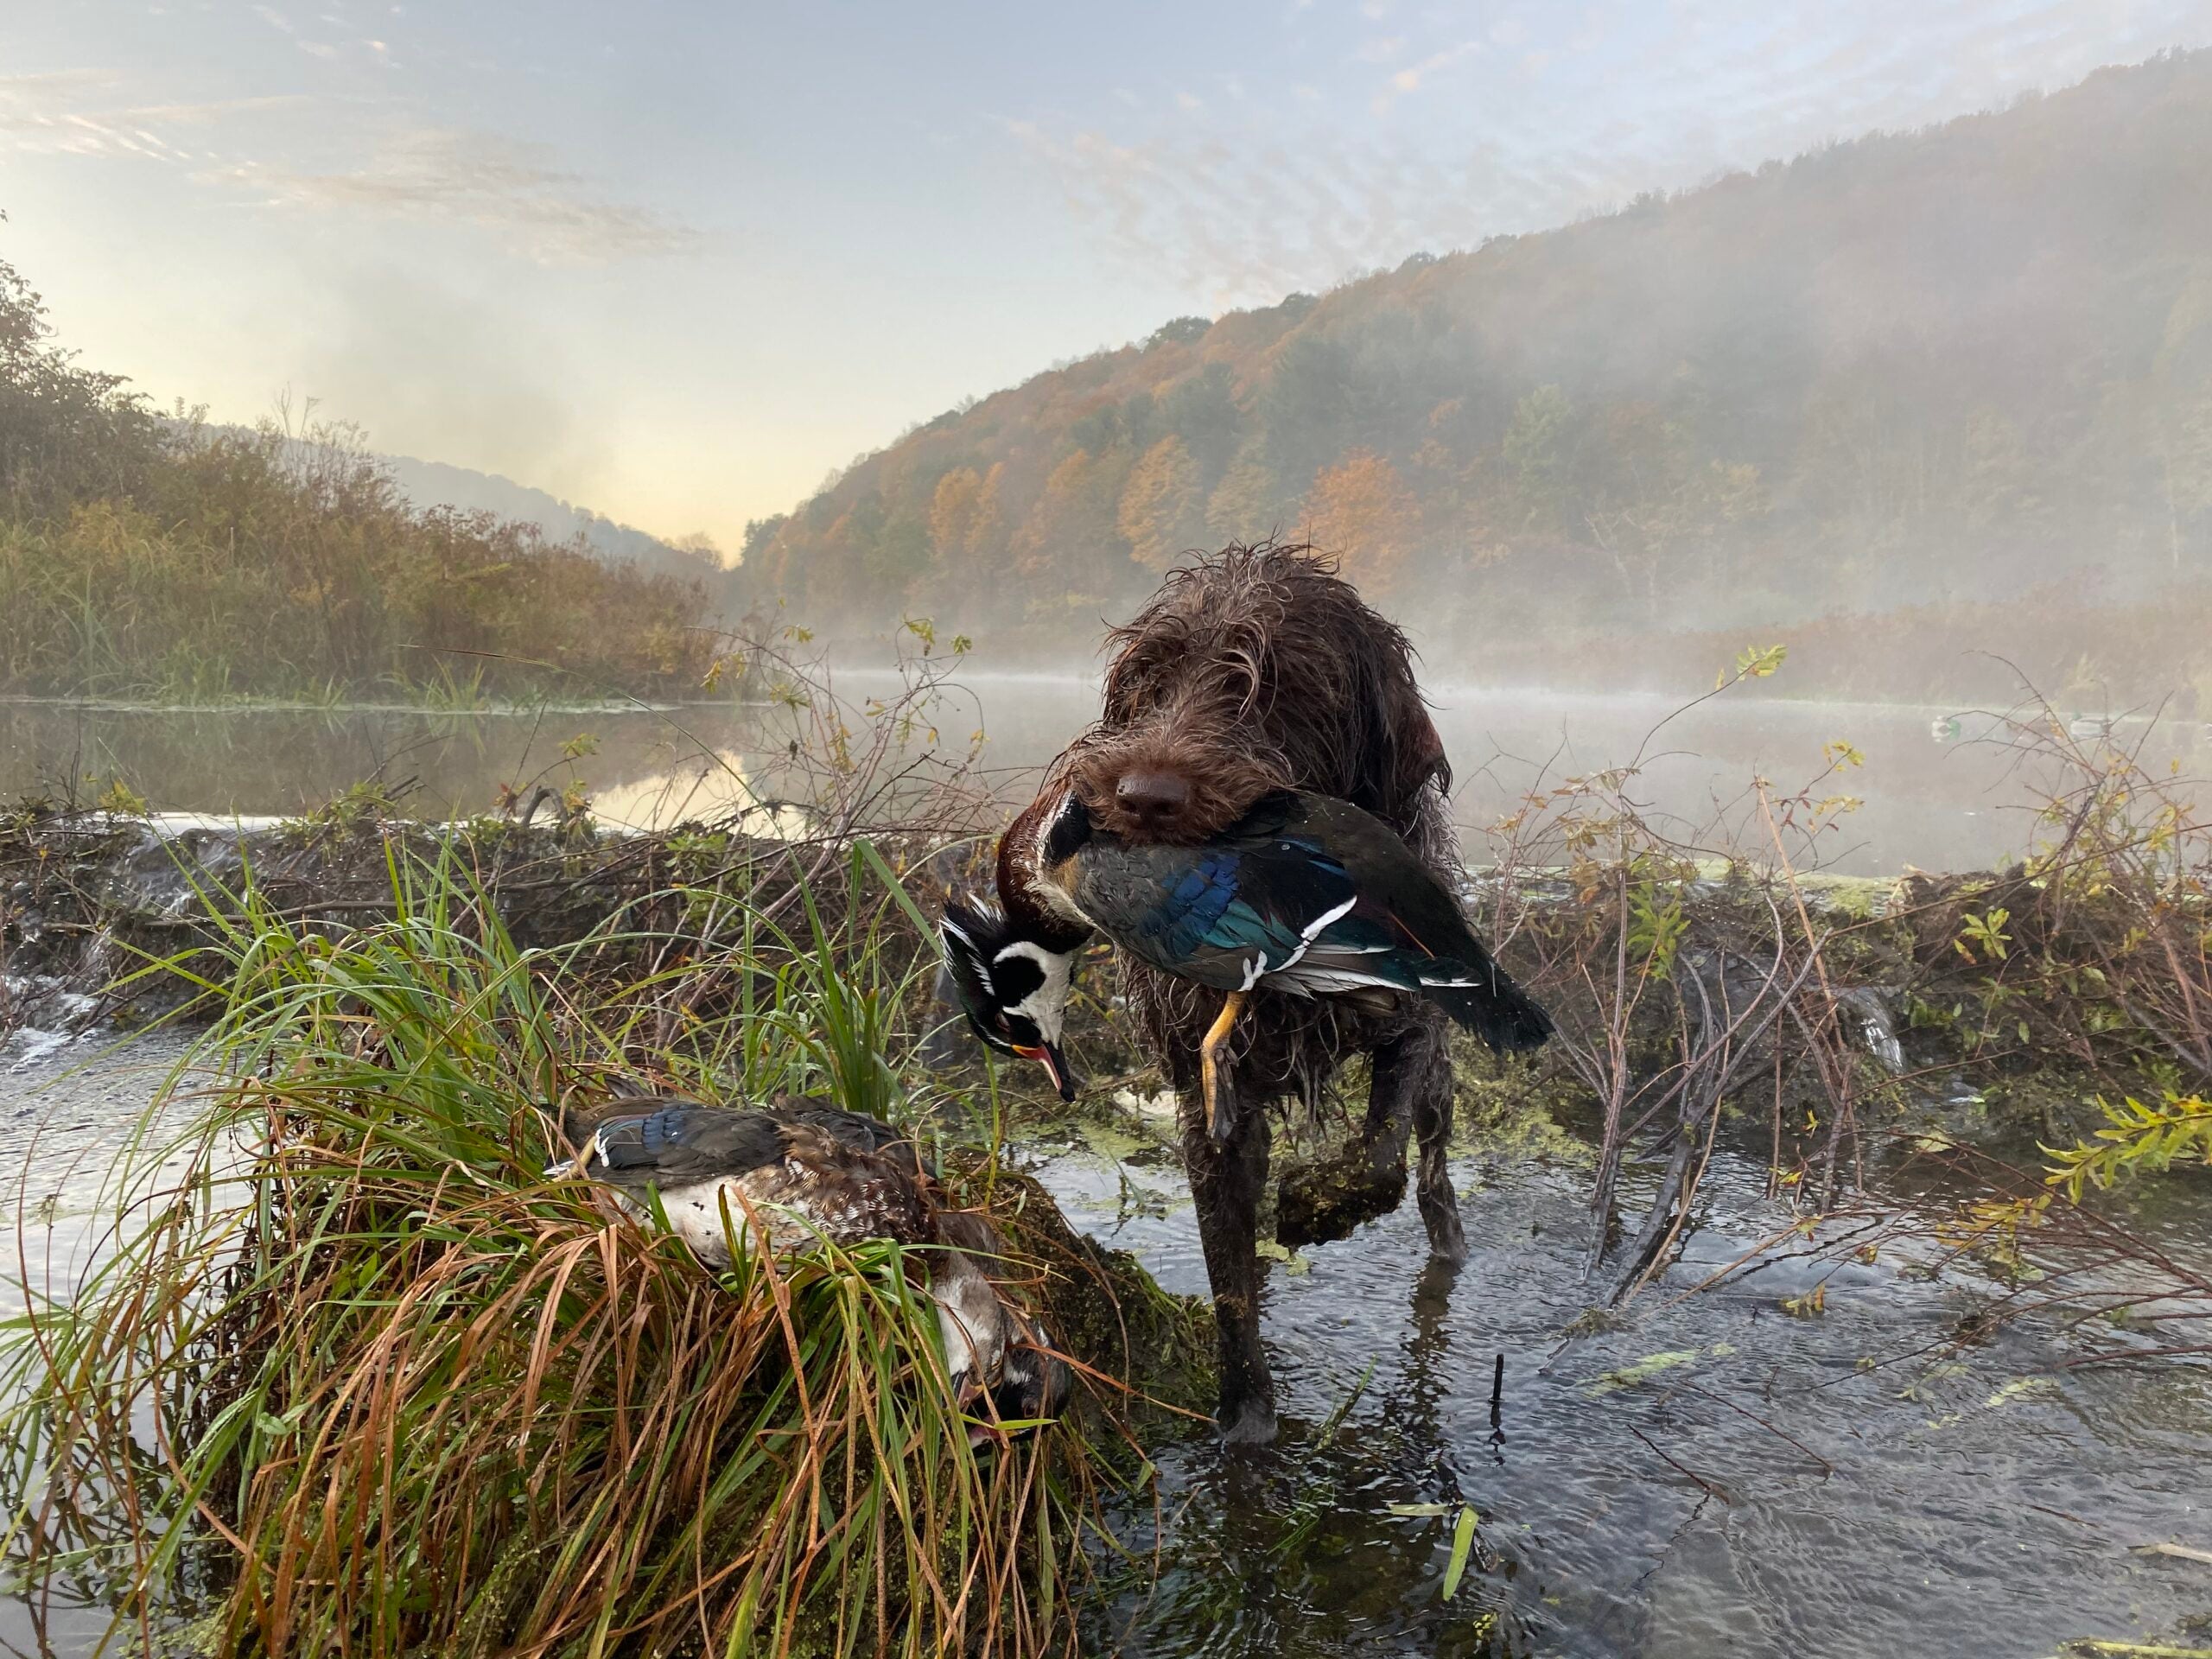 Wirehaired griffon retrieves a wood duck